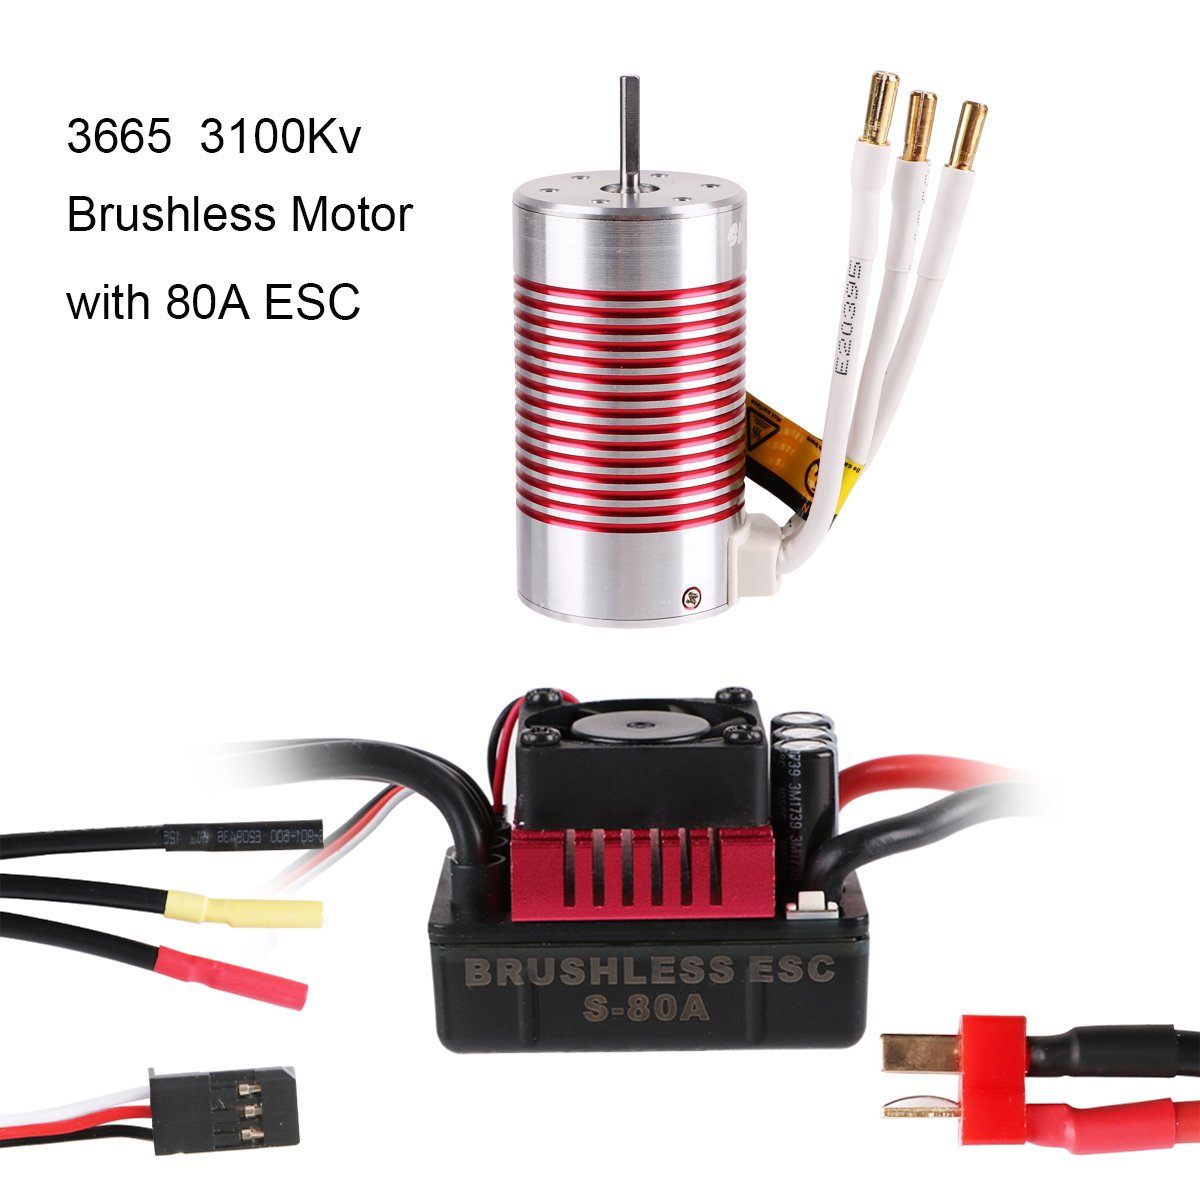 Crazepony-UK 3665 3100KV 4P Brushless Motor With 80A ESC ( Electric Speed Controller ) Waterproof For 1/10 1/8 RC Car ( Red )